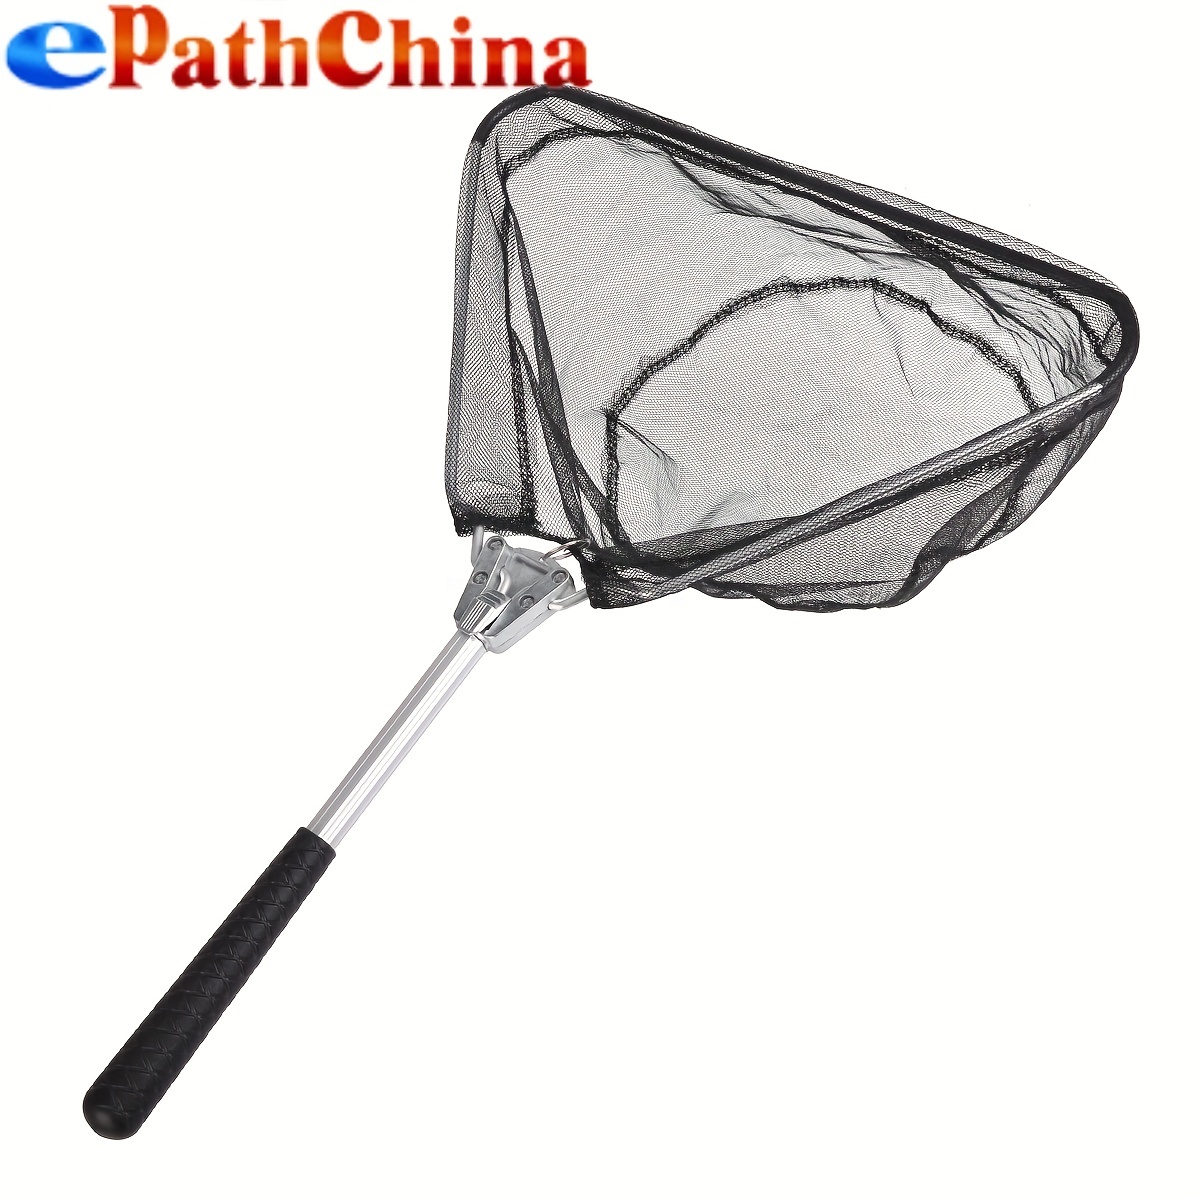 Foldable Aluminum Alloy Fishing Fish Pole With Retractable Landing